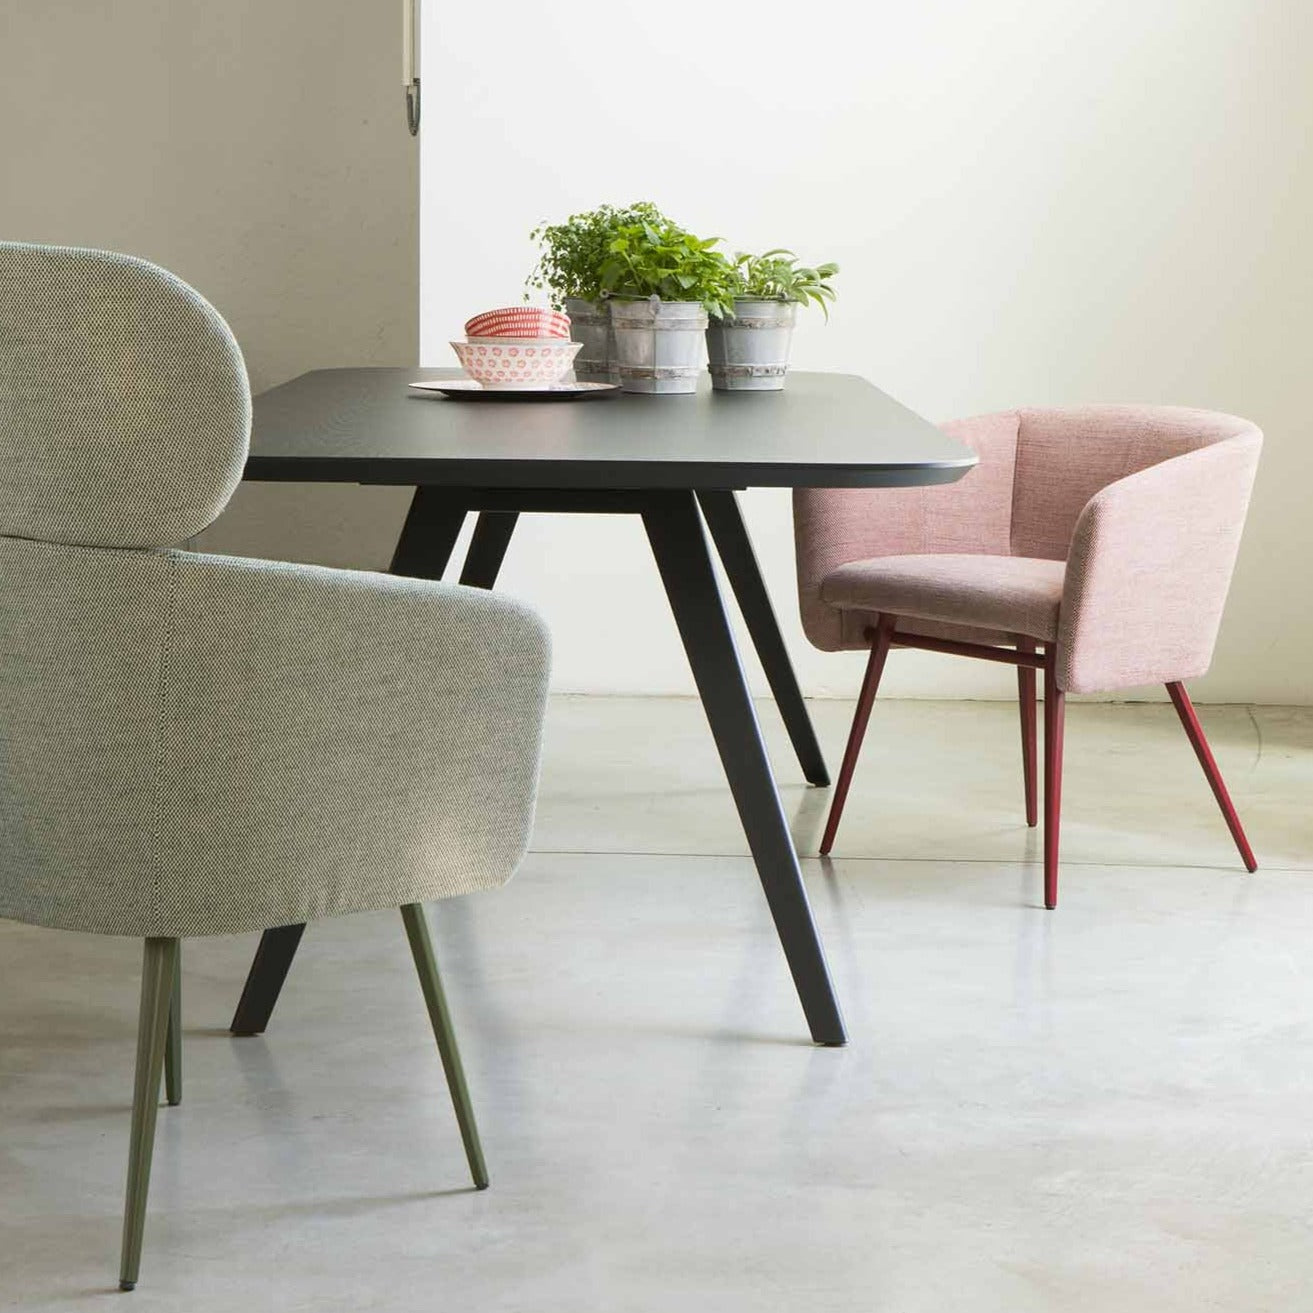 BALU XL MET Armchair white and pink, interior view